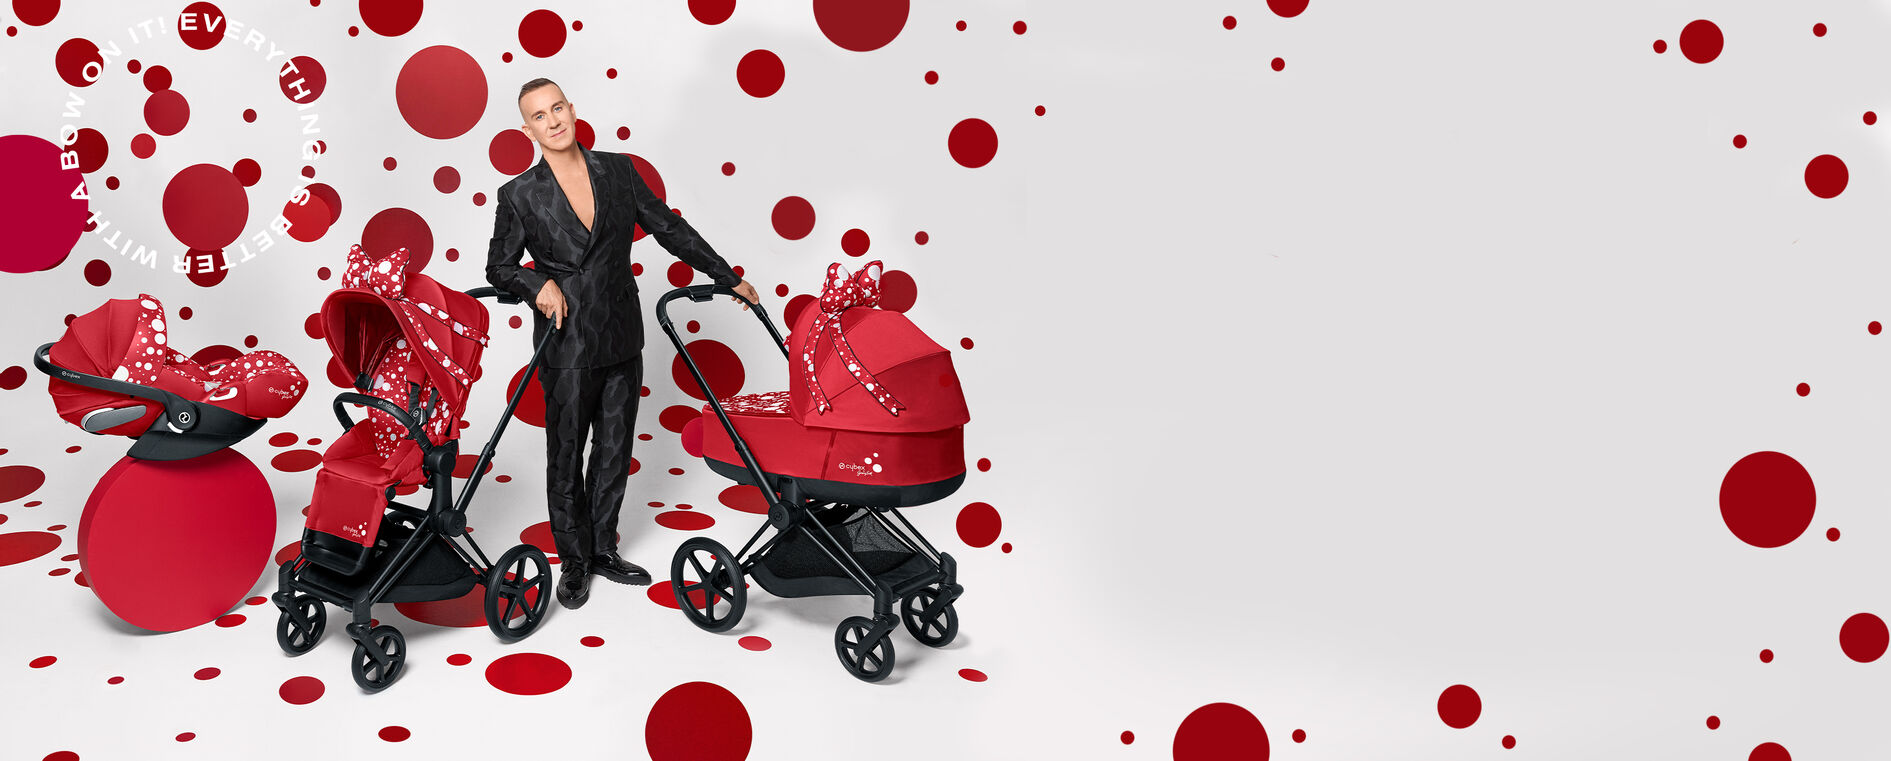 Cybex by Jeremy Scott Petticoat Collection Banner Image